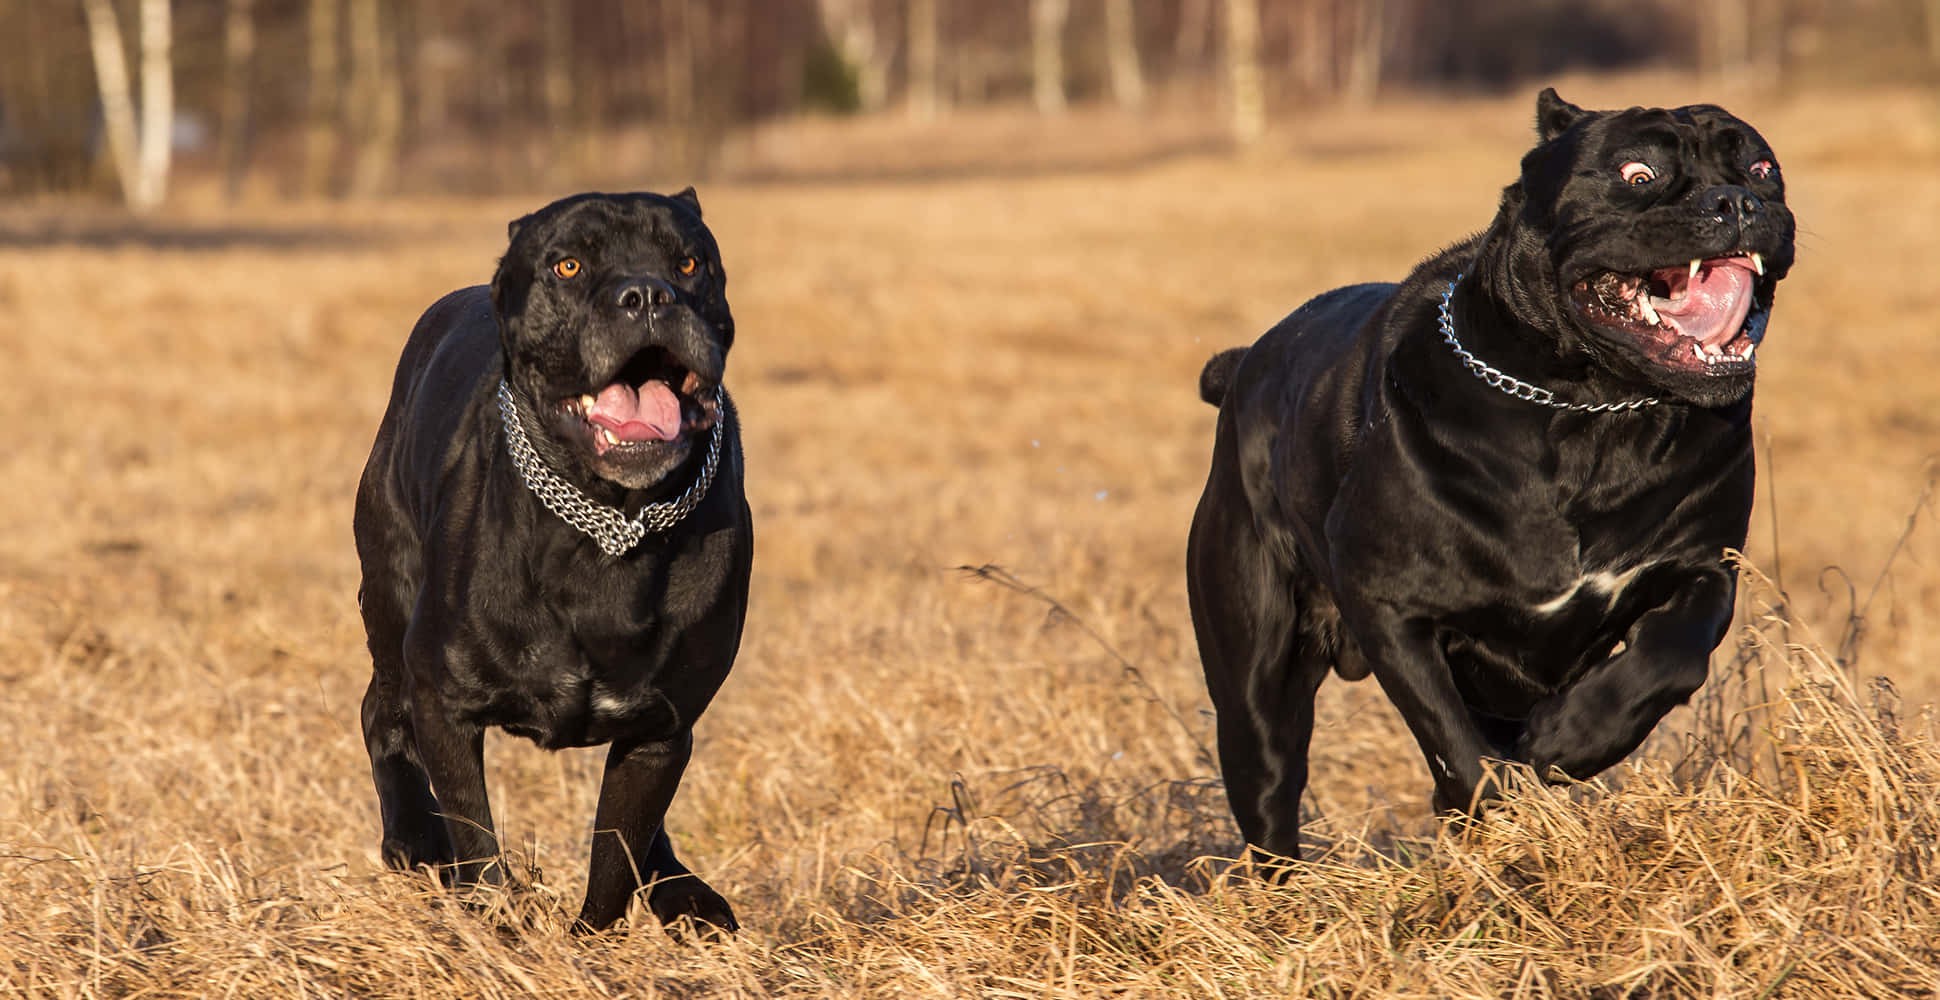 Elegant and Powerful - The Cane Corso